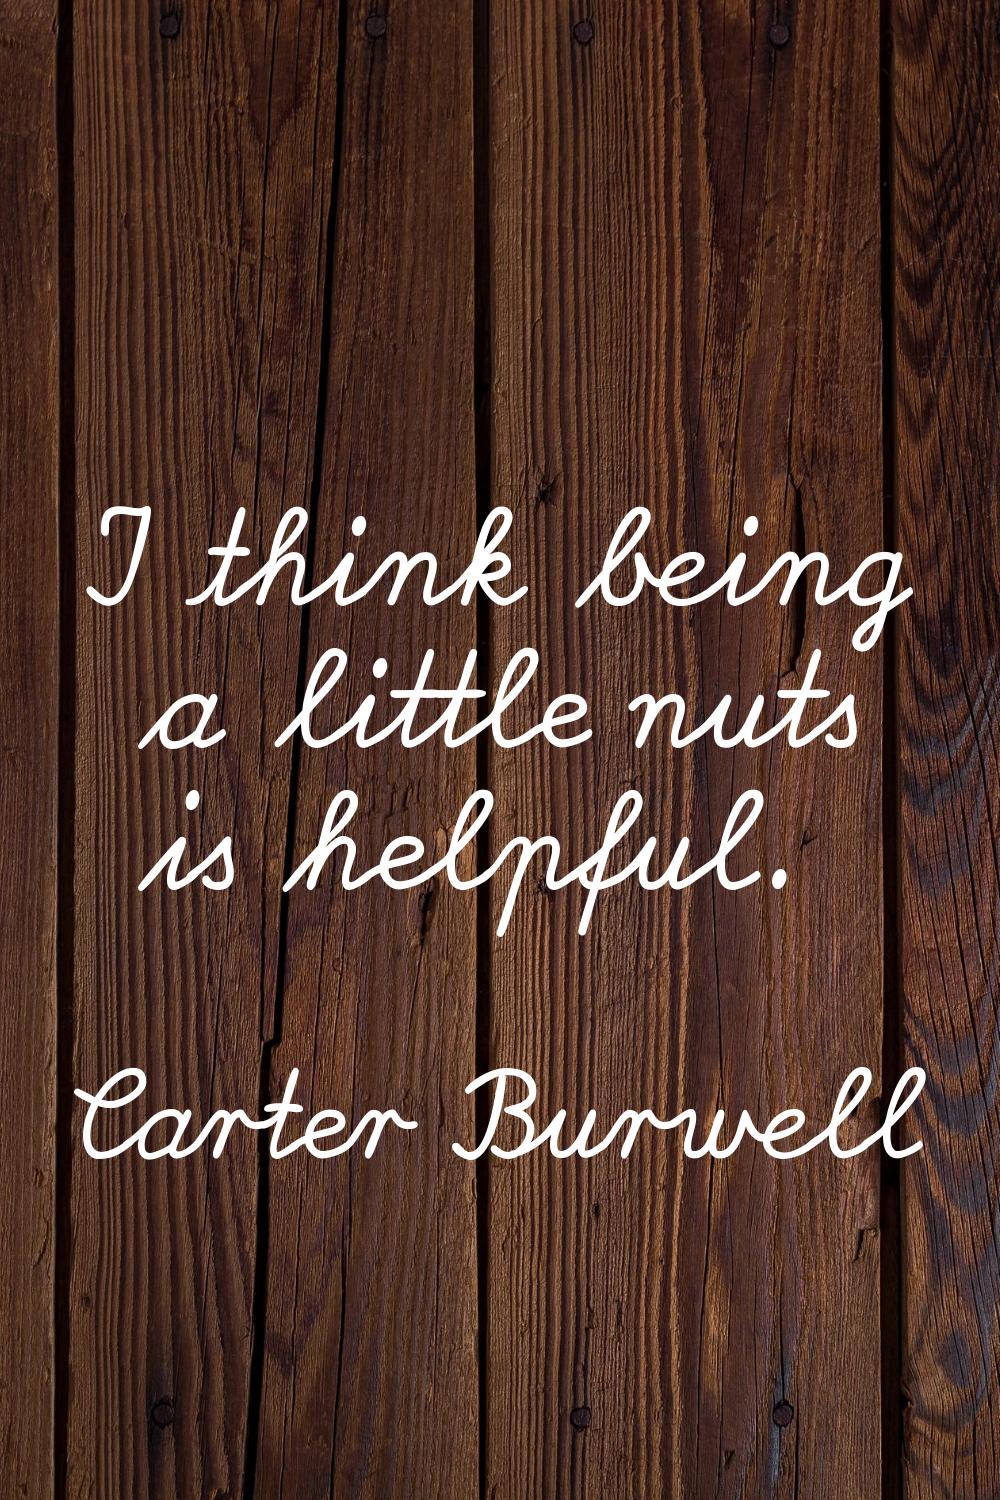 I think being a little nuts is helpful.